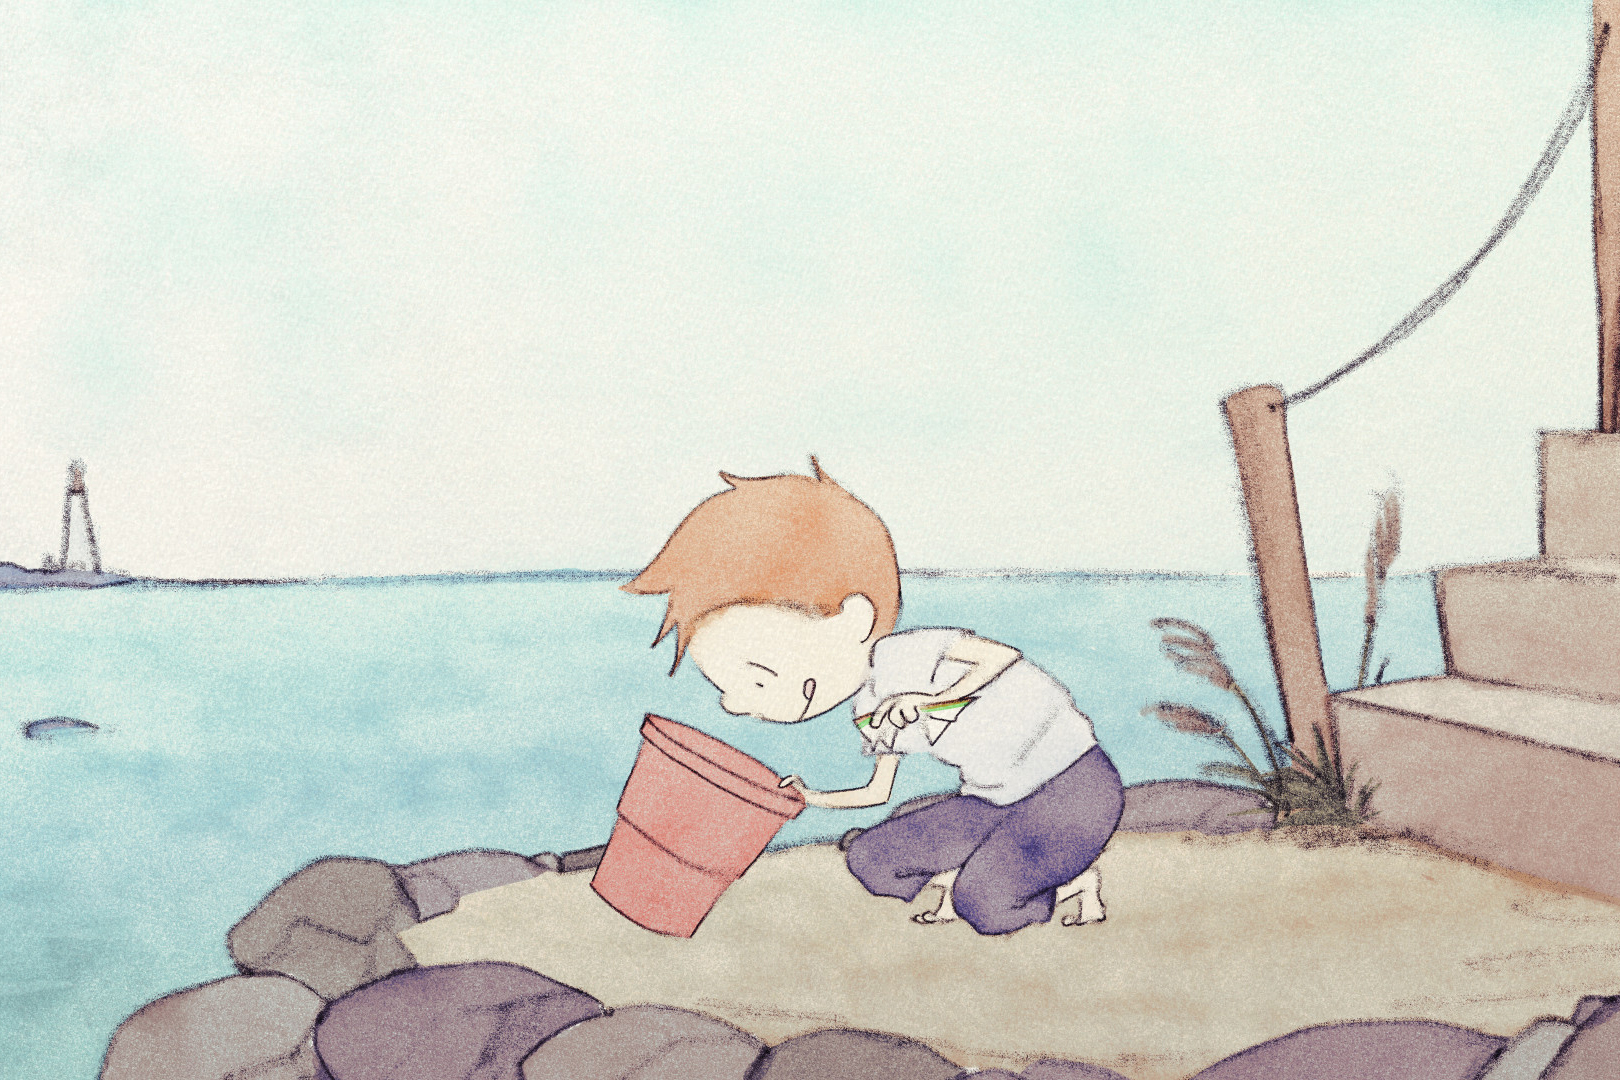 A 2D animation of a boy looking in a bucket next to a body of water.